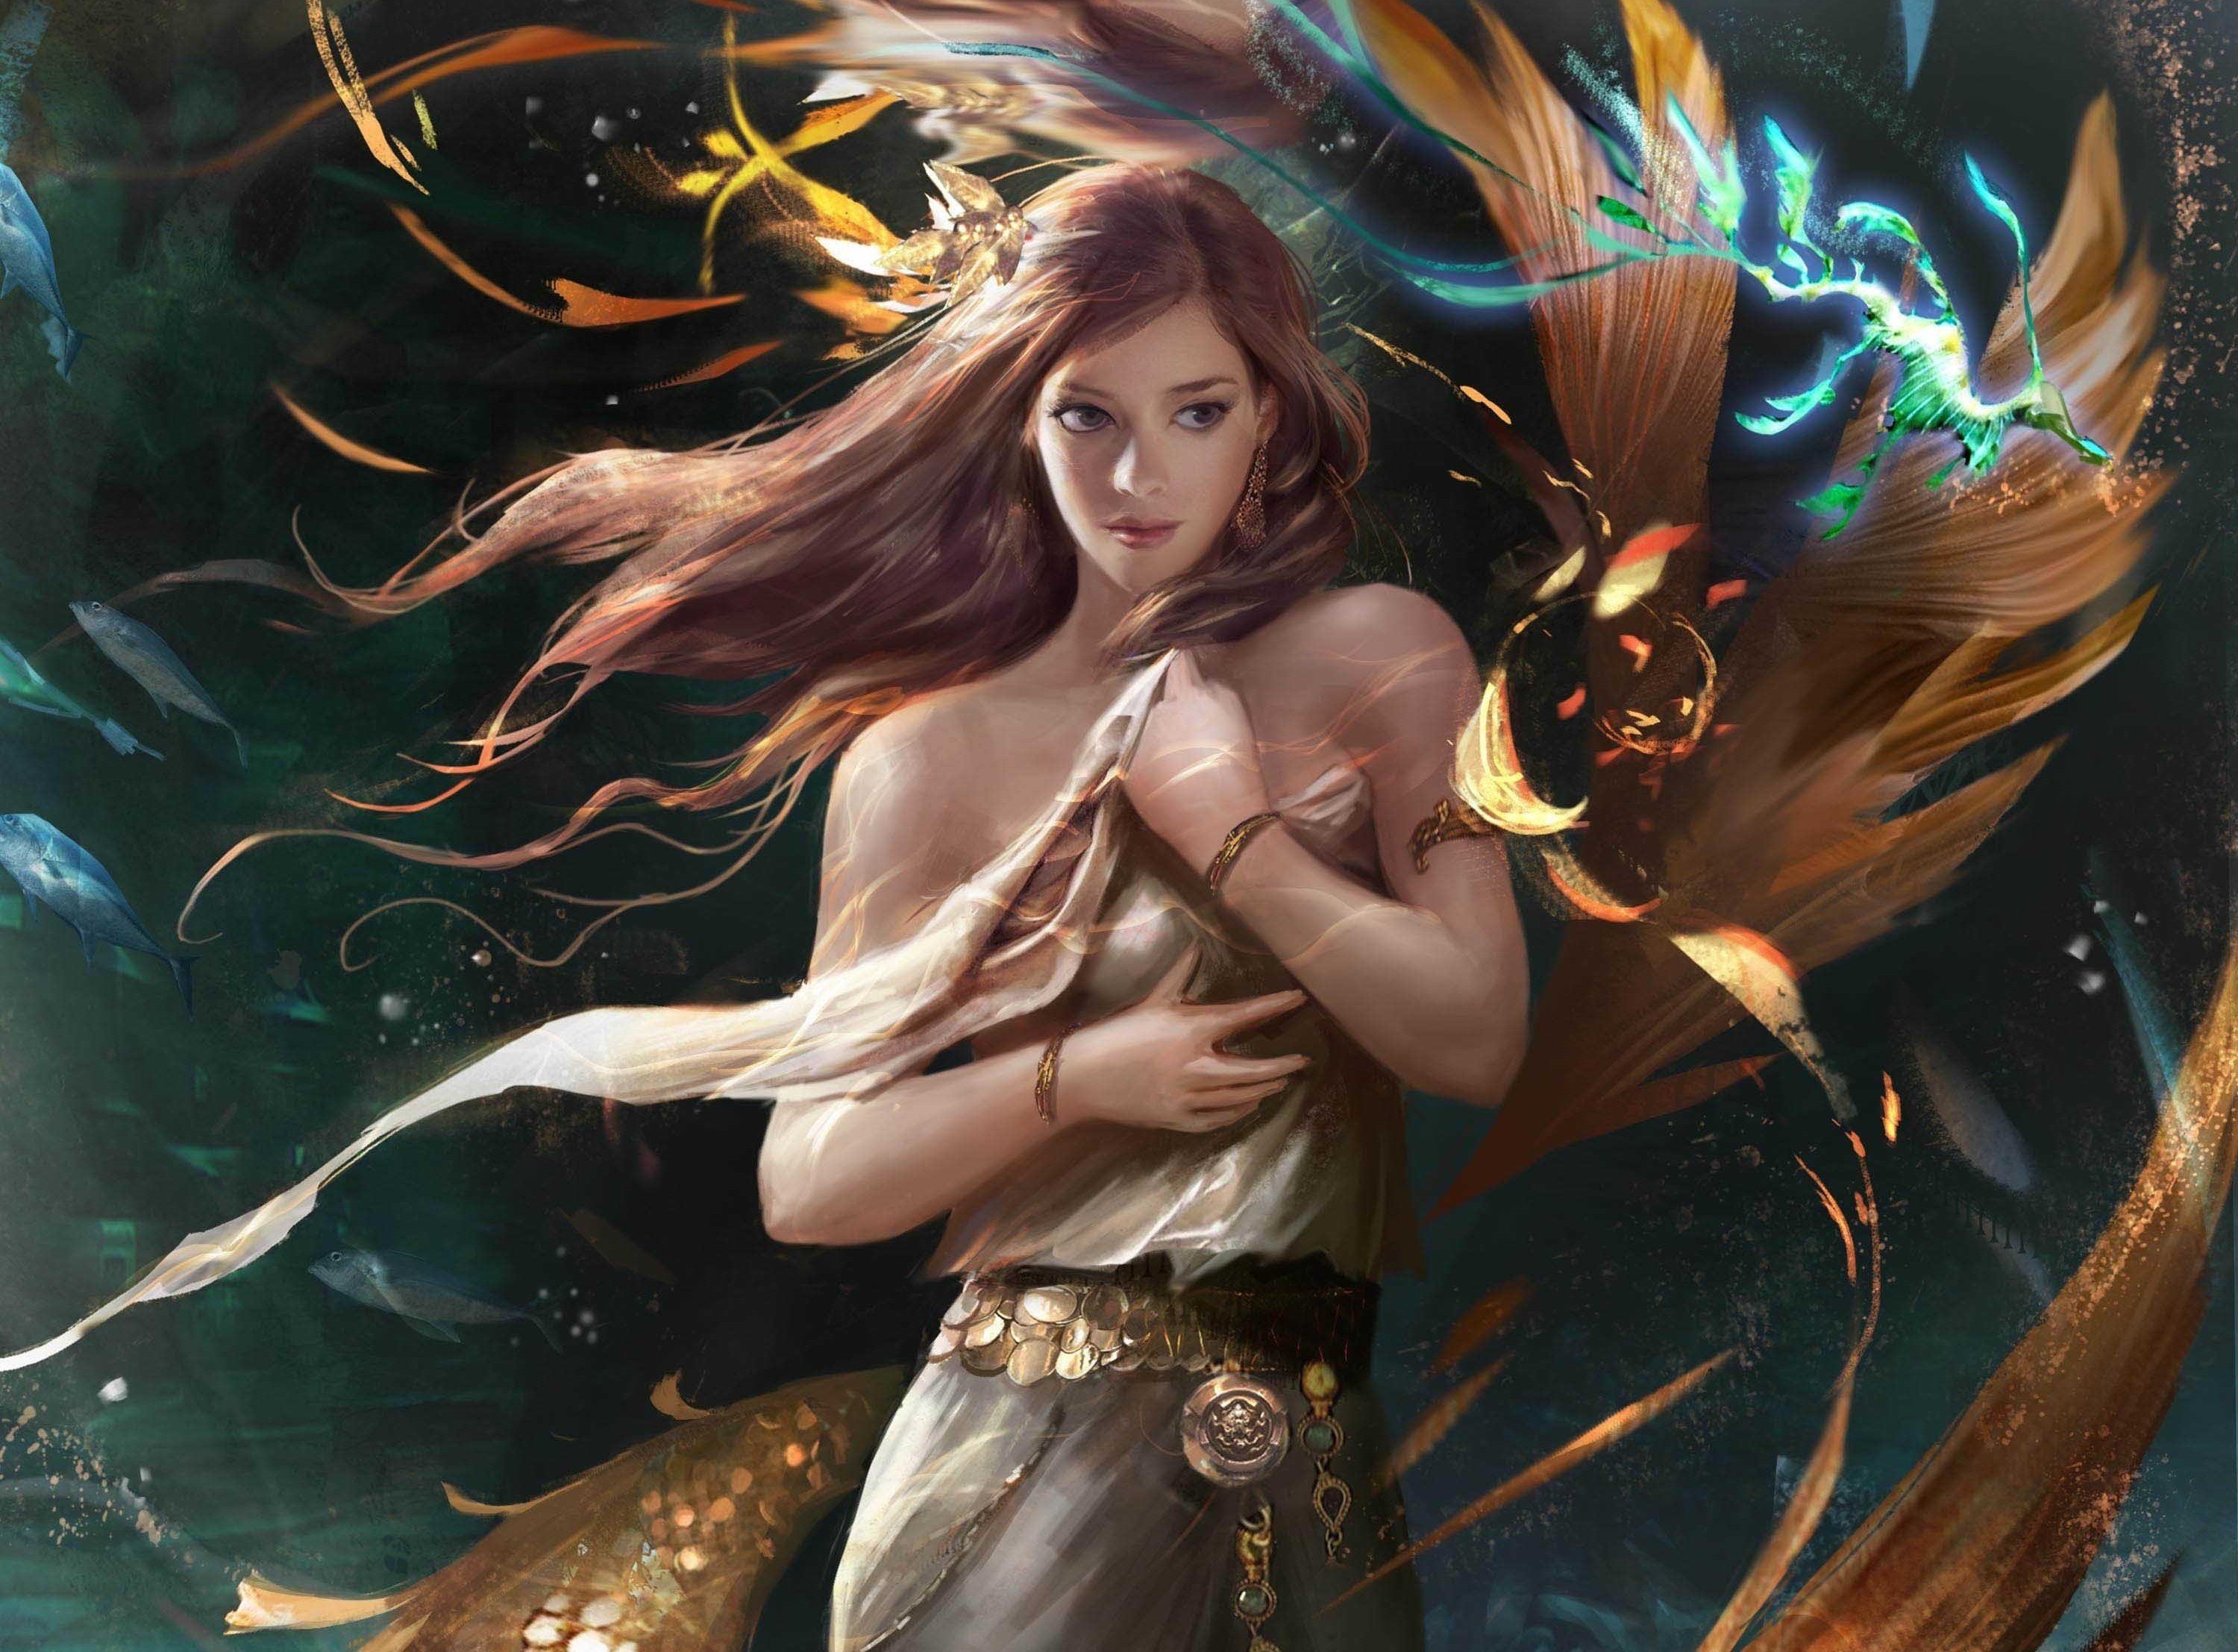 LEGEND OF THE CRYPTIDS rpg fantasy card fighting wallpaperx2215